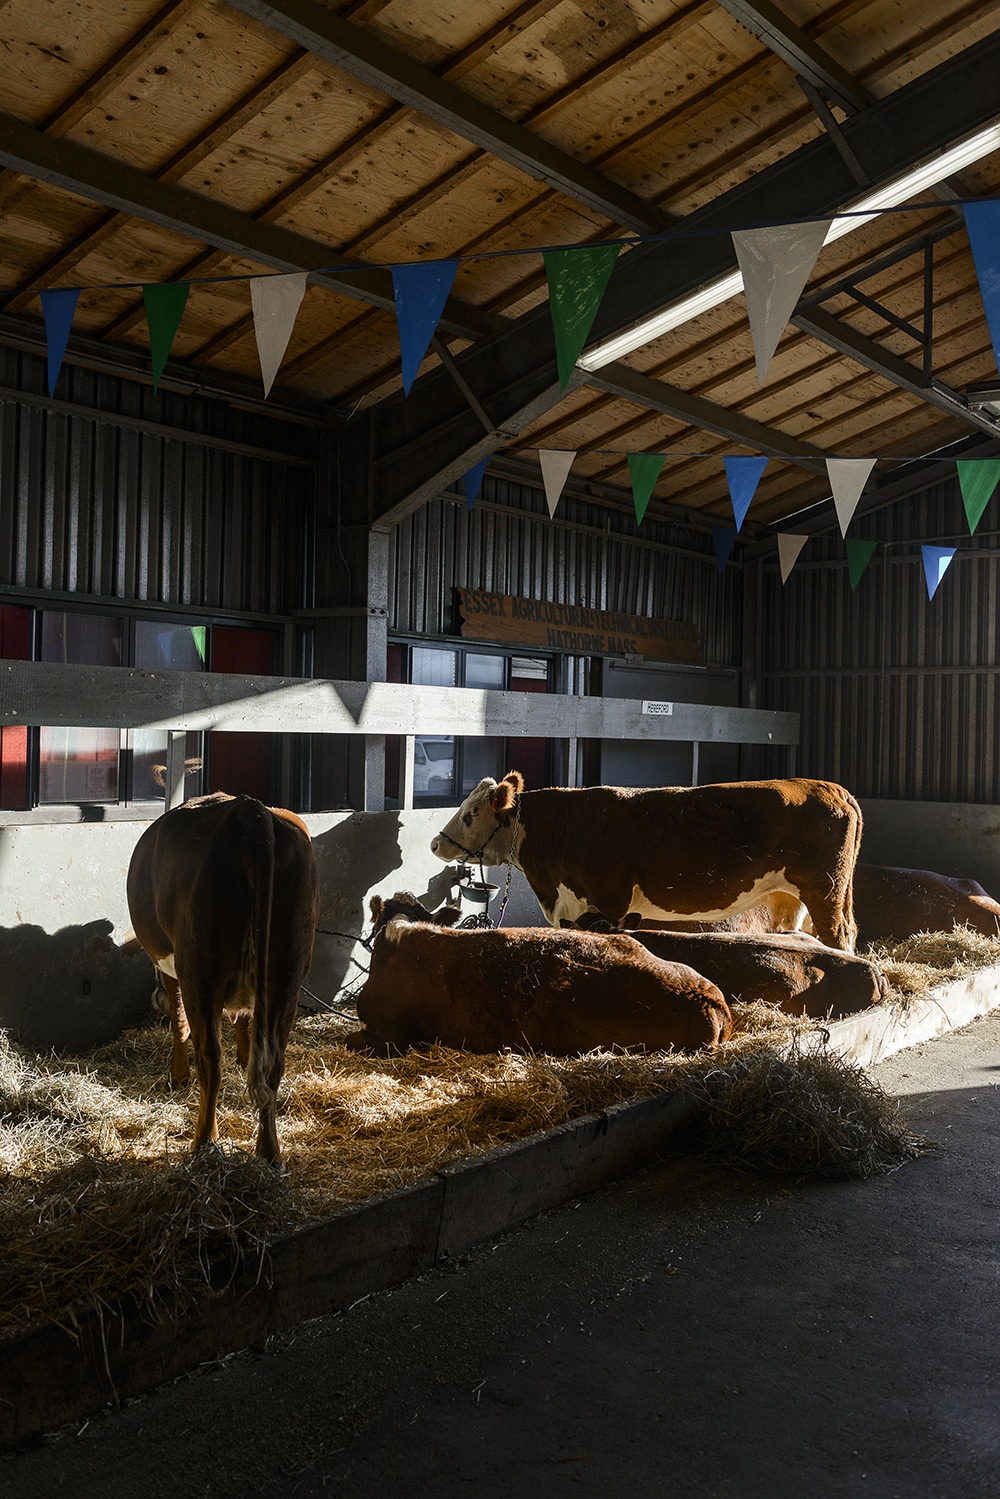 Cows rest in the cow barn in early morning light.